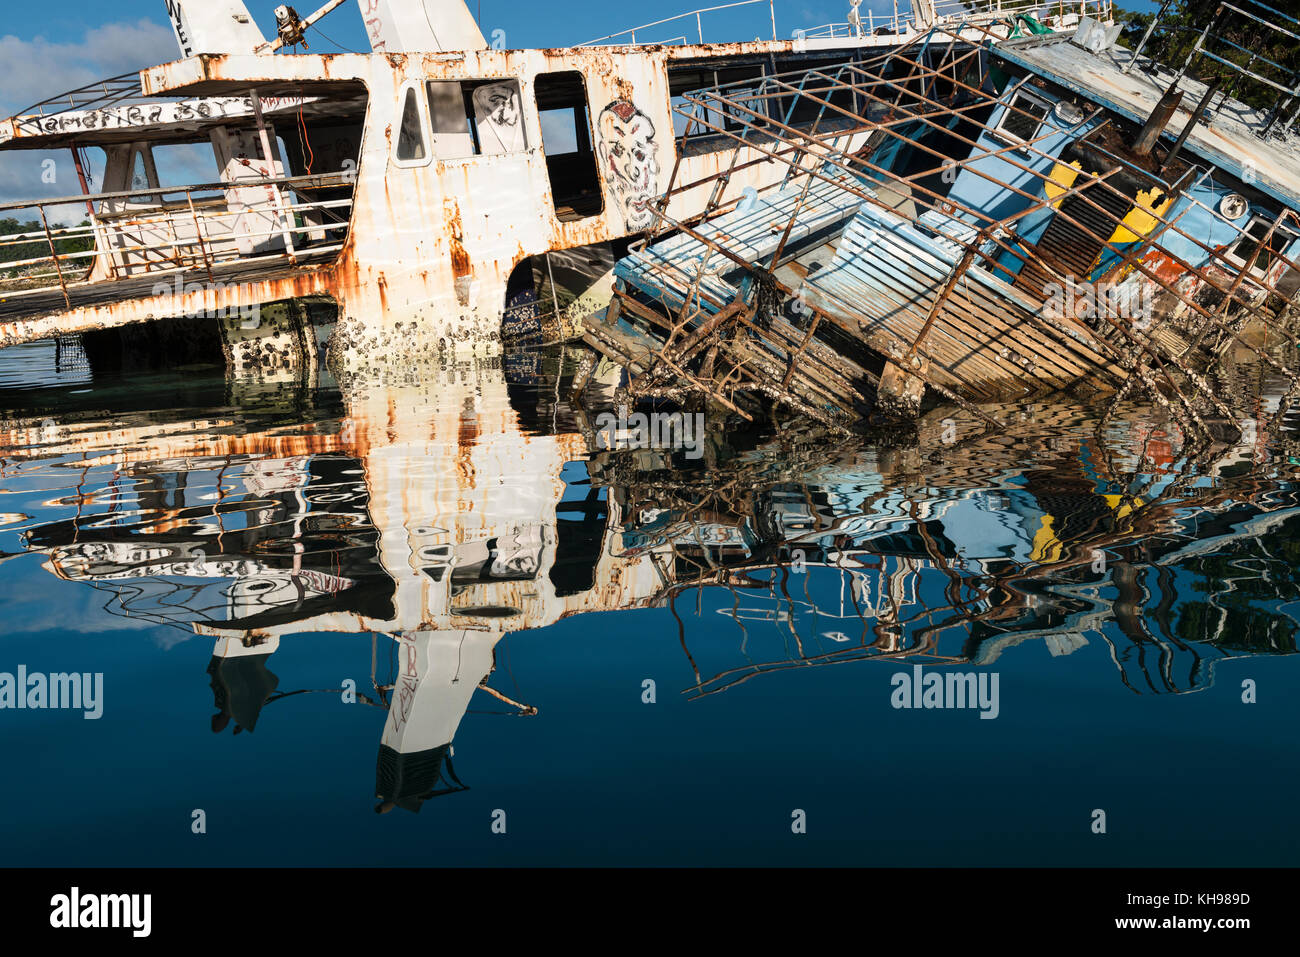 Damaged, wrecked and abandoned boats in Port Vila harbour a year after Cyclone Pam. (Cyclone not necessarily responsible for all shipwrecks.)  Vanuatu Stock Photo